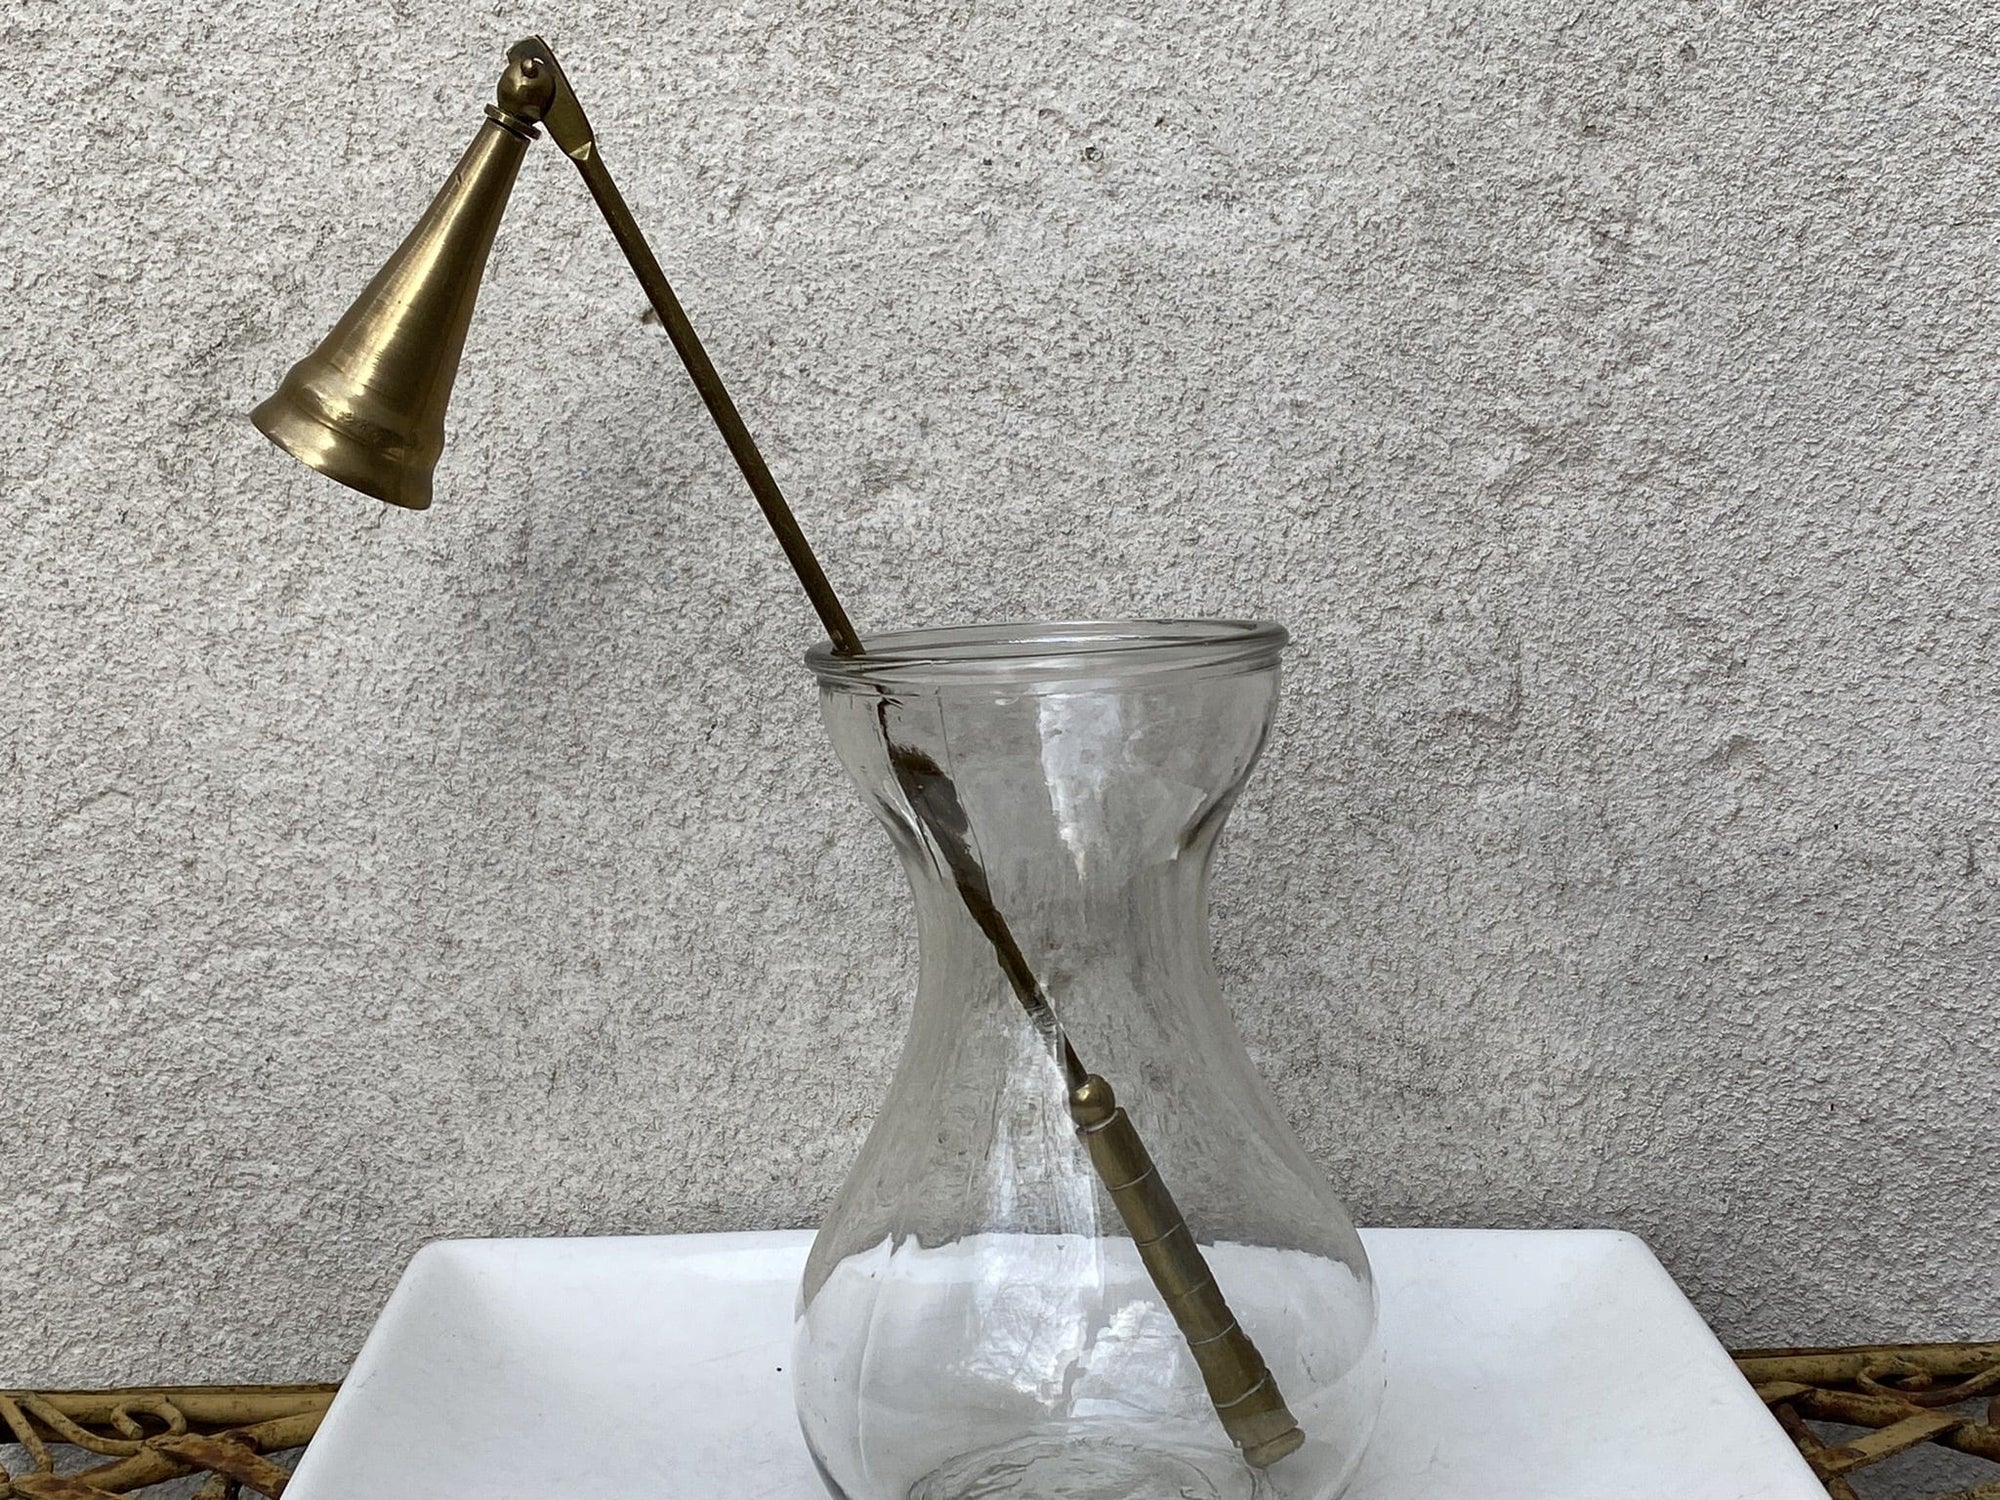 I Like Mike's Mid Century Modern Candle Snuffers Solid Brass Candle Snuffer with Tall Cap and 10" Reach